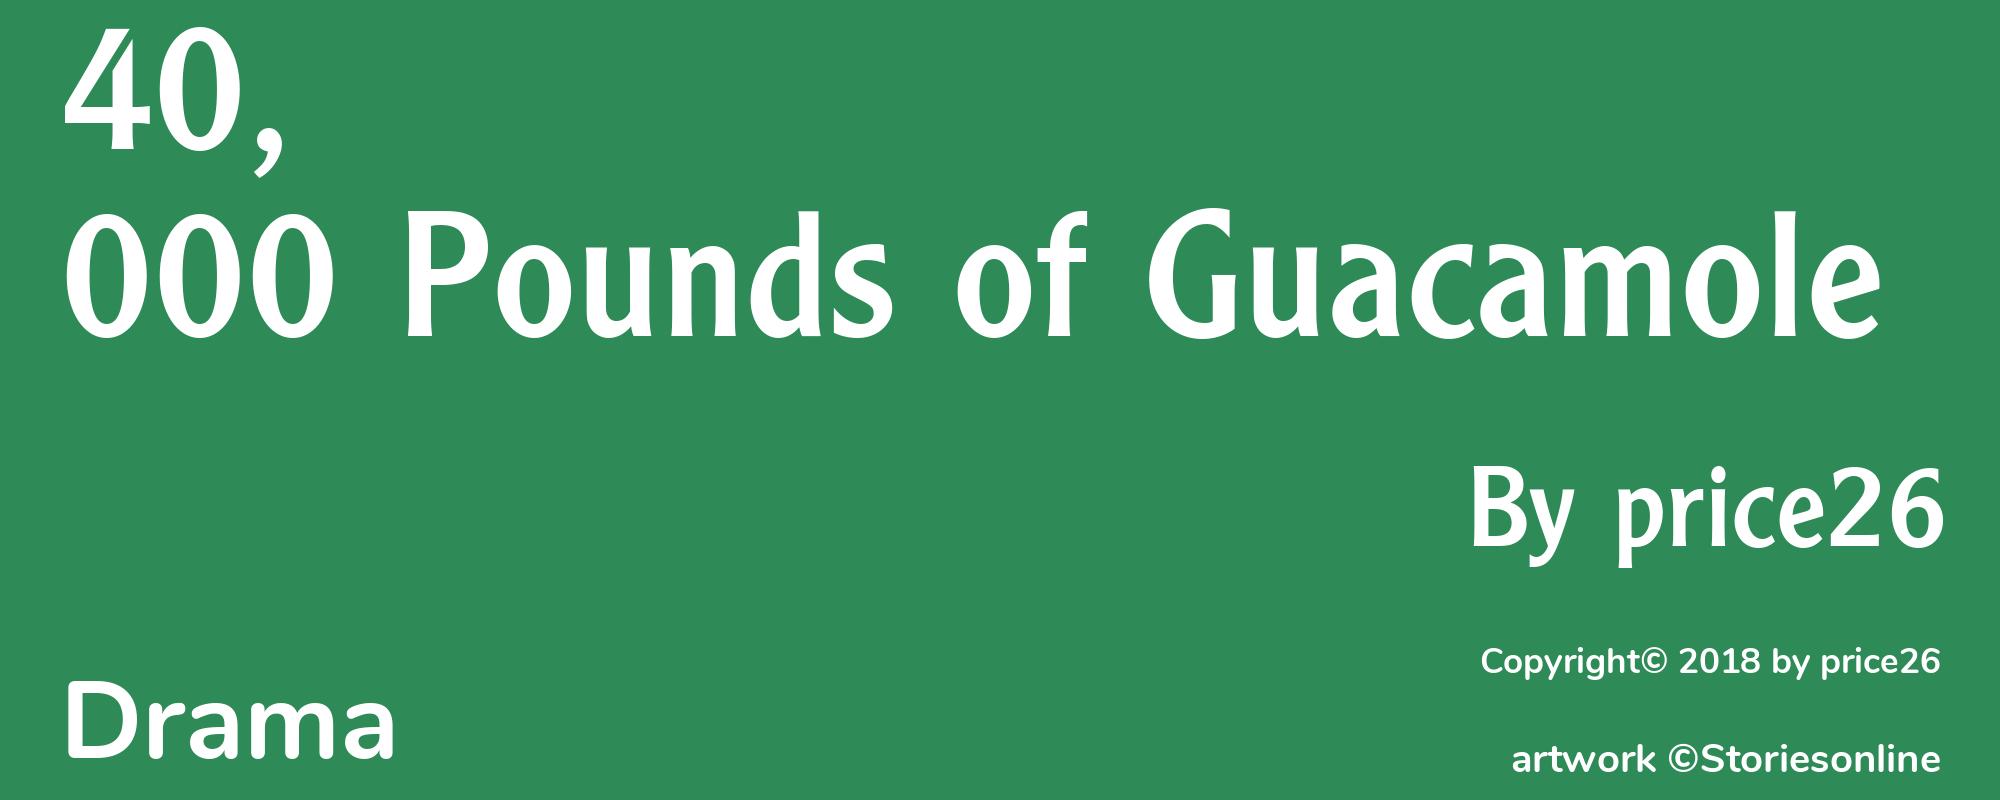 40,000 Pounds of Guacamole - Cover